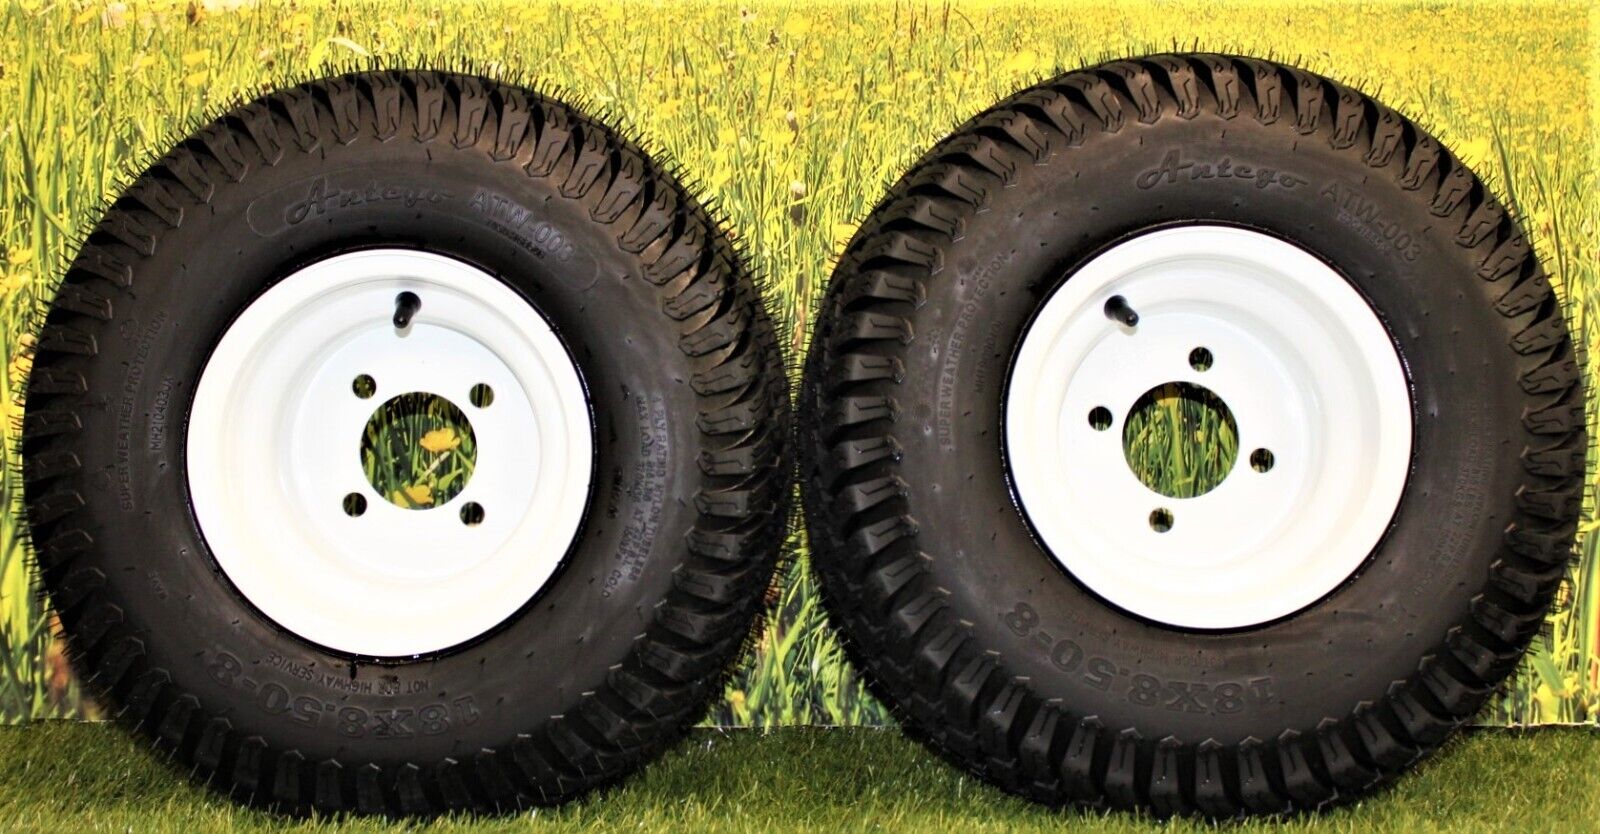 18x8.50-8 Turf Tires on 8x7 White Steel Wheels Compatible with Golf Carts